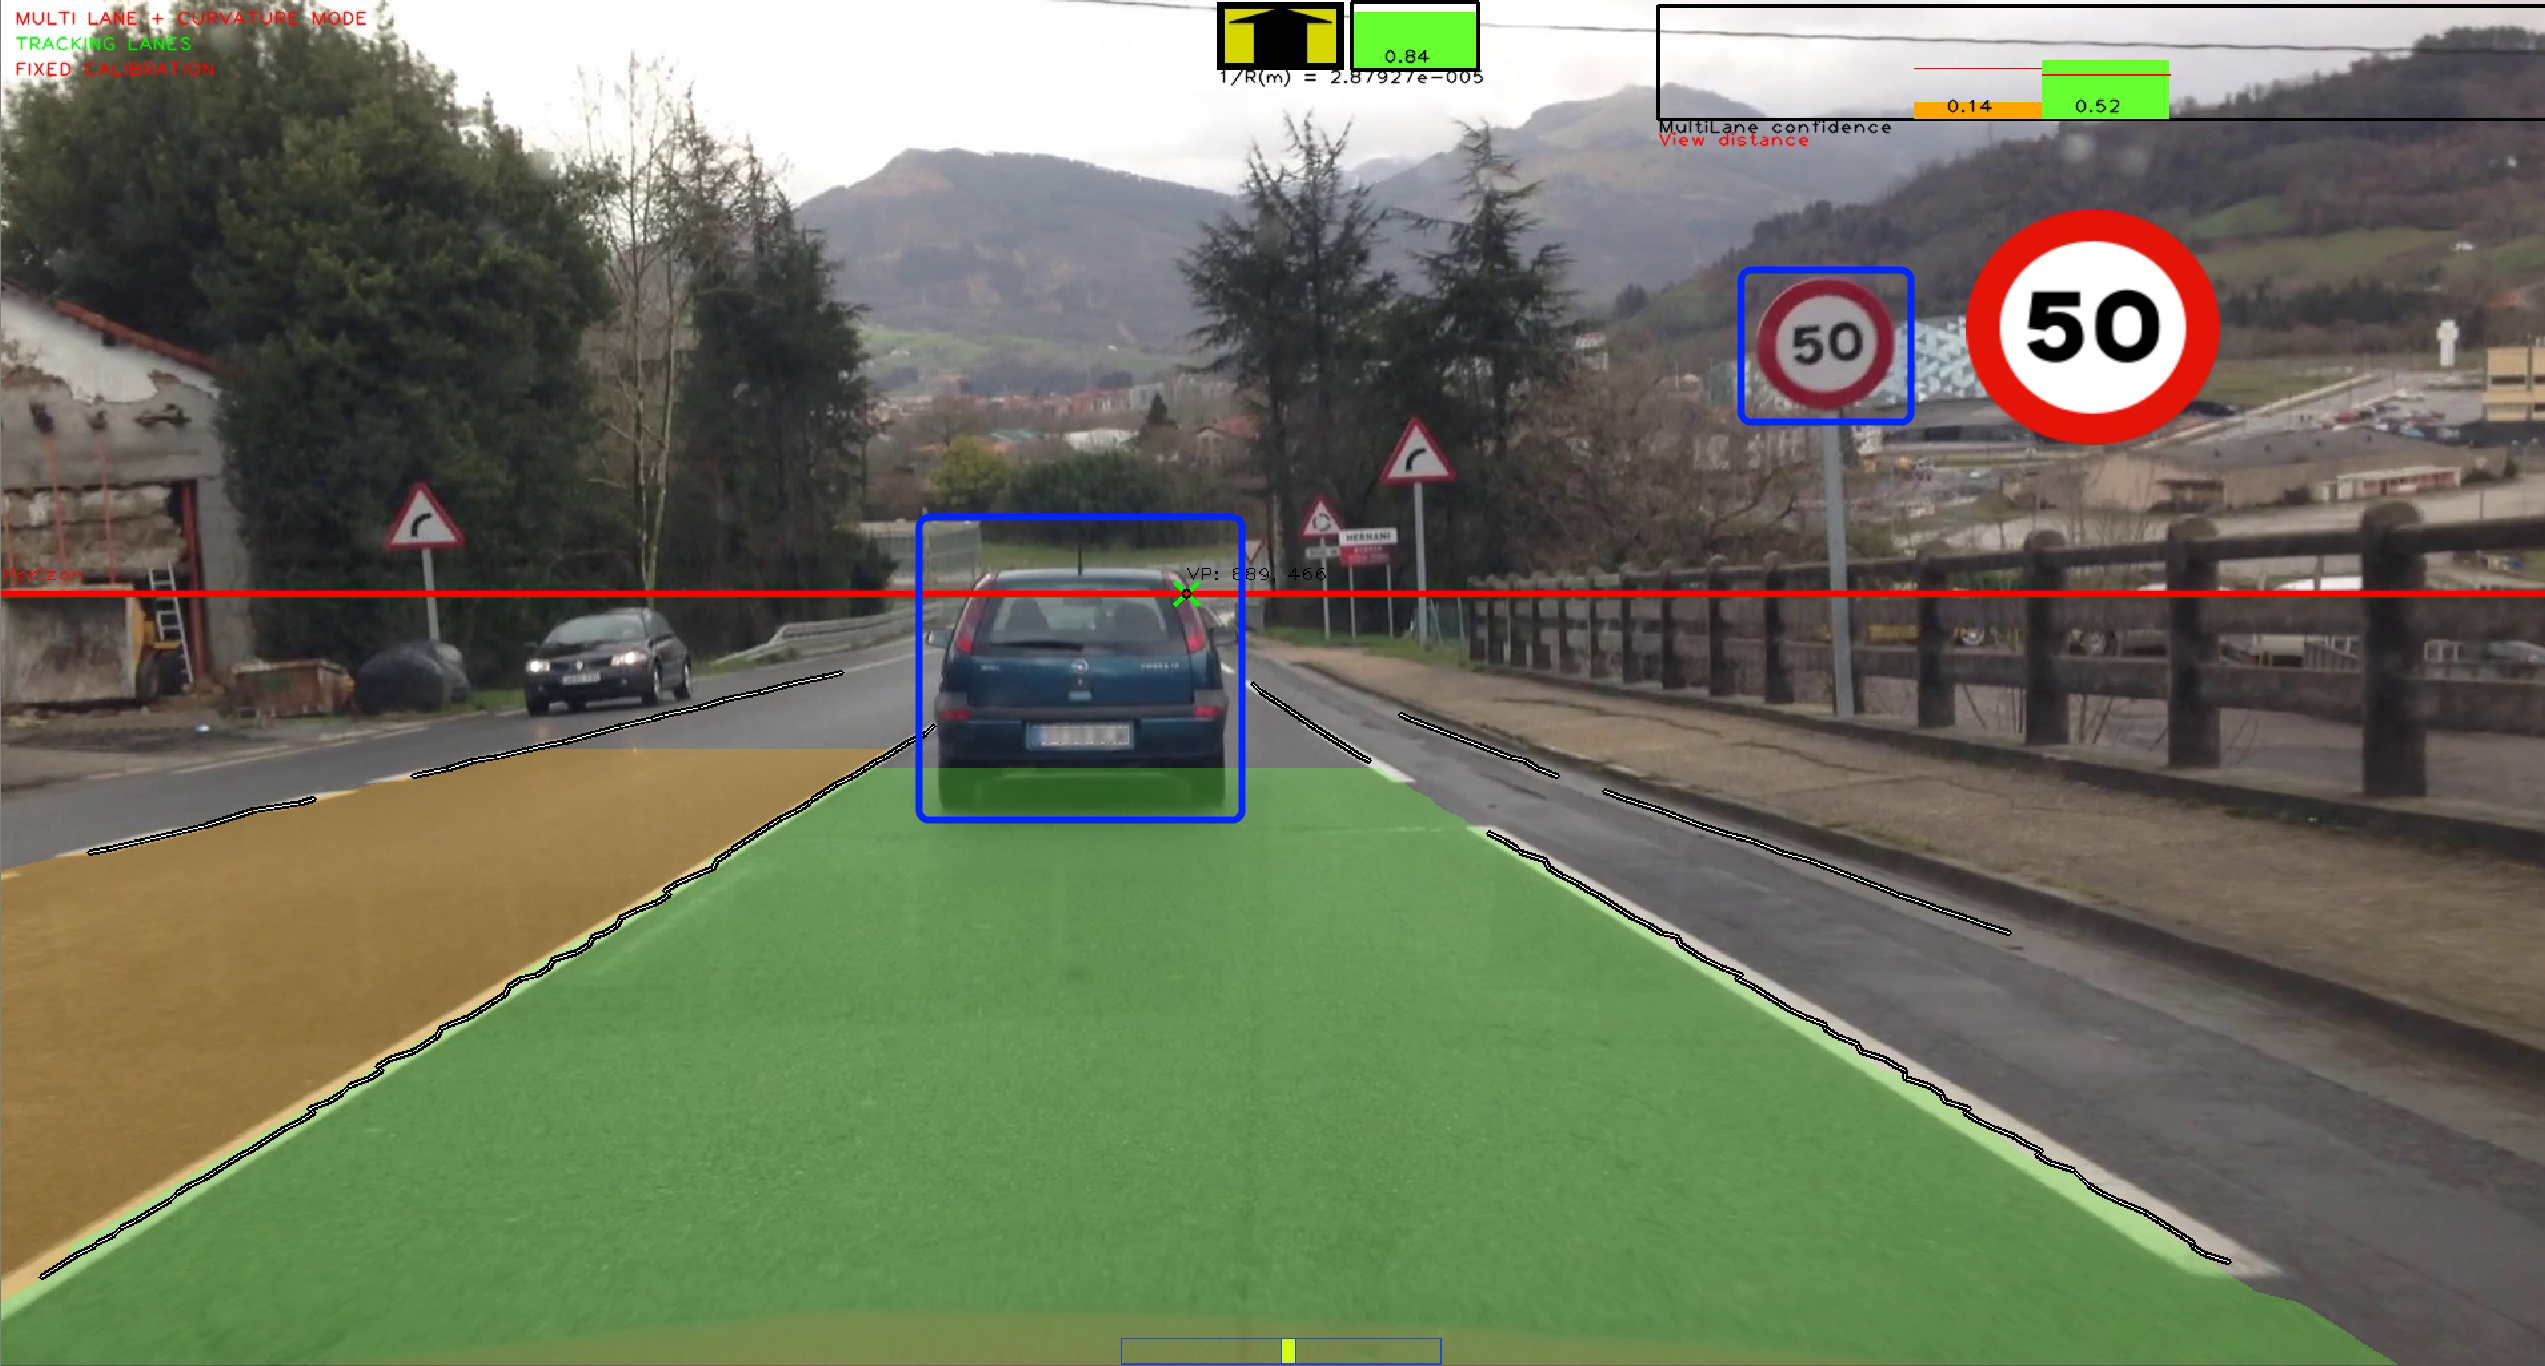 Satellite Navigation and Computer Vision technologies to guide drivers at lane level